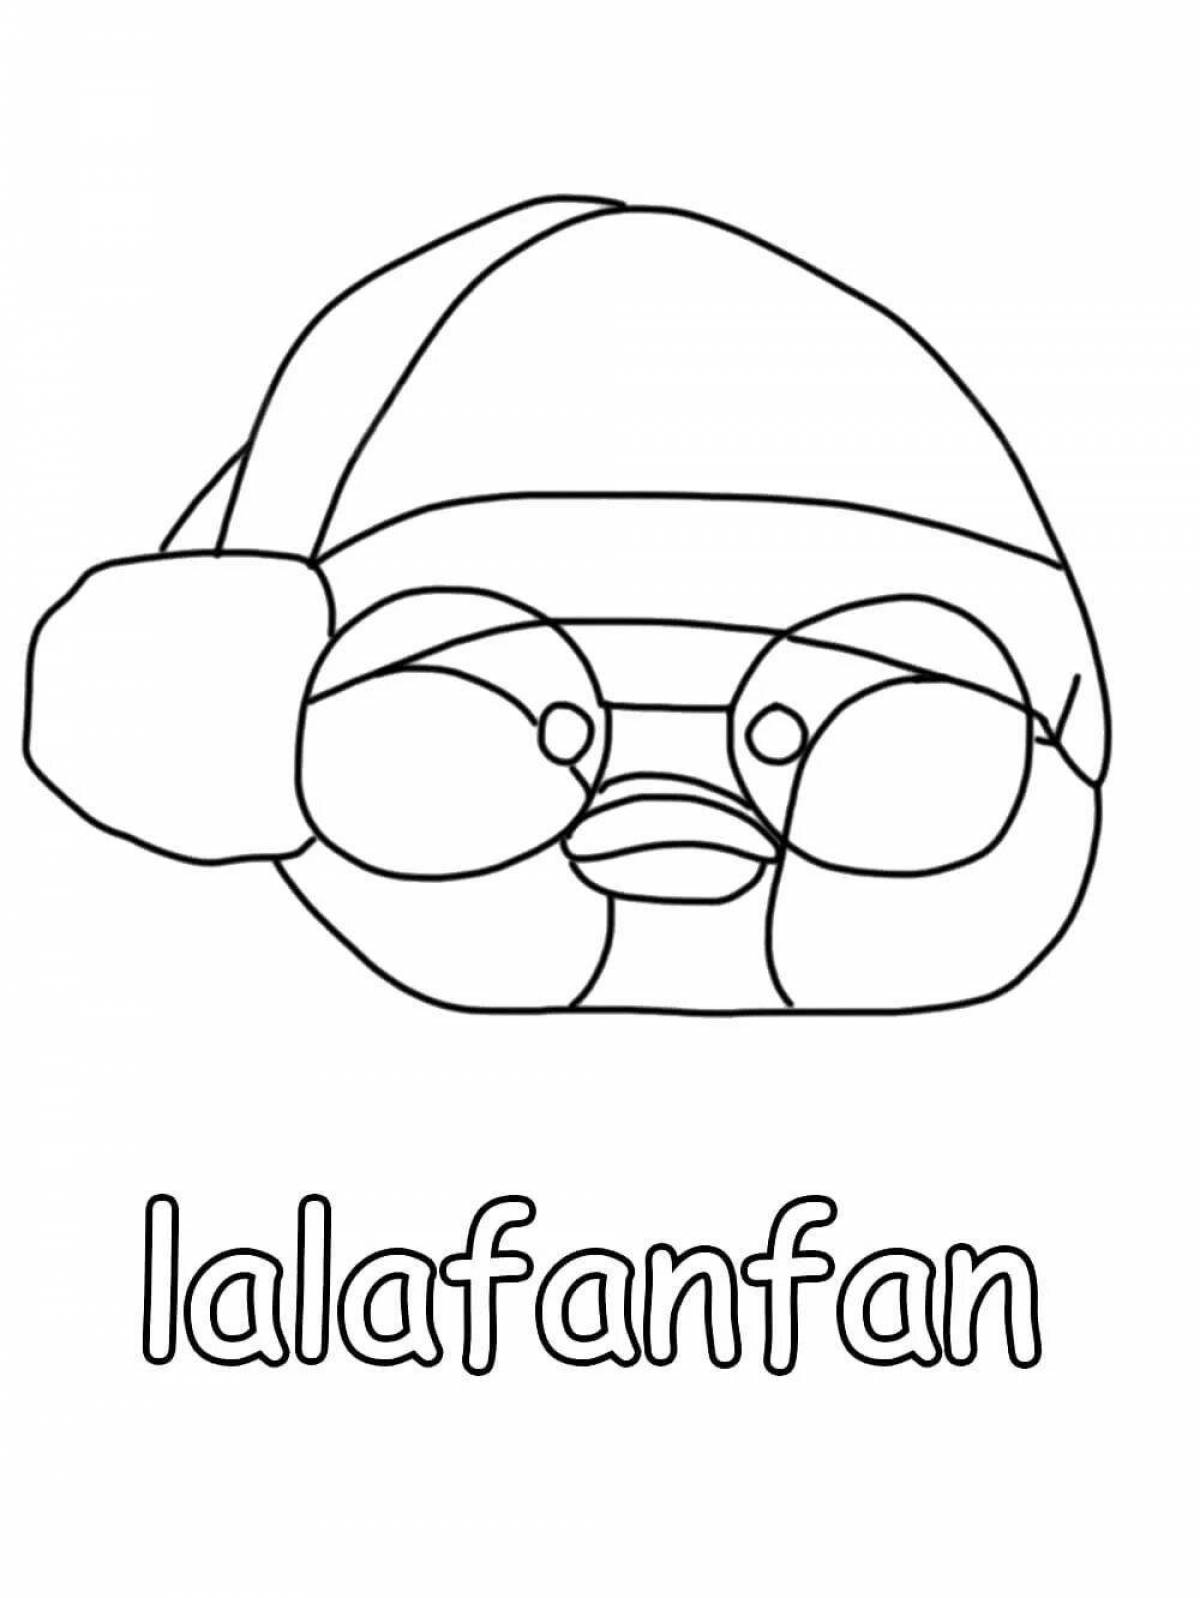 Lalafanfan adorable duck house coloring page